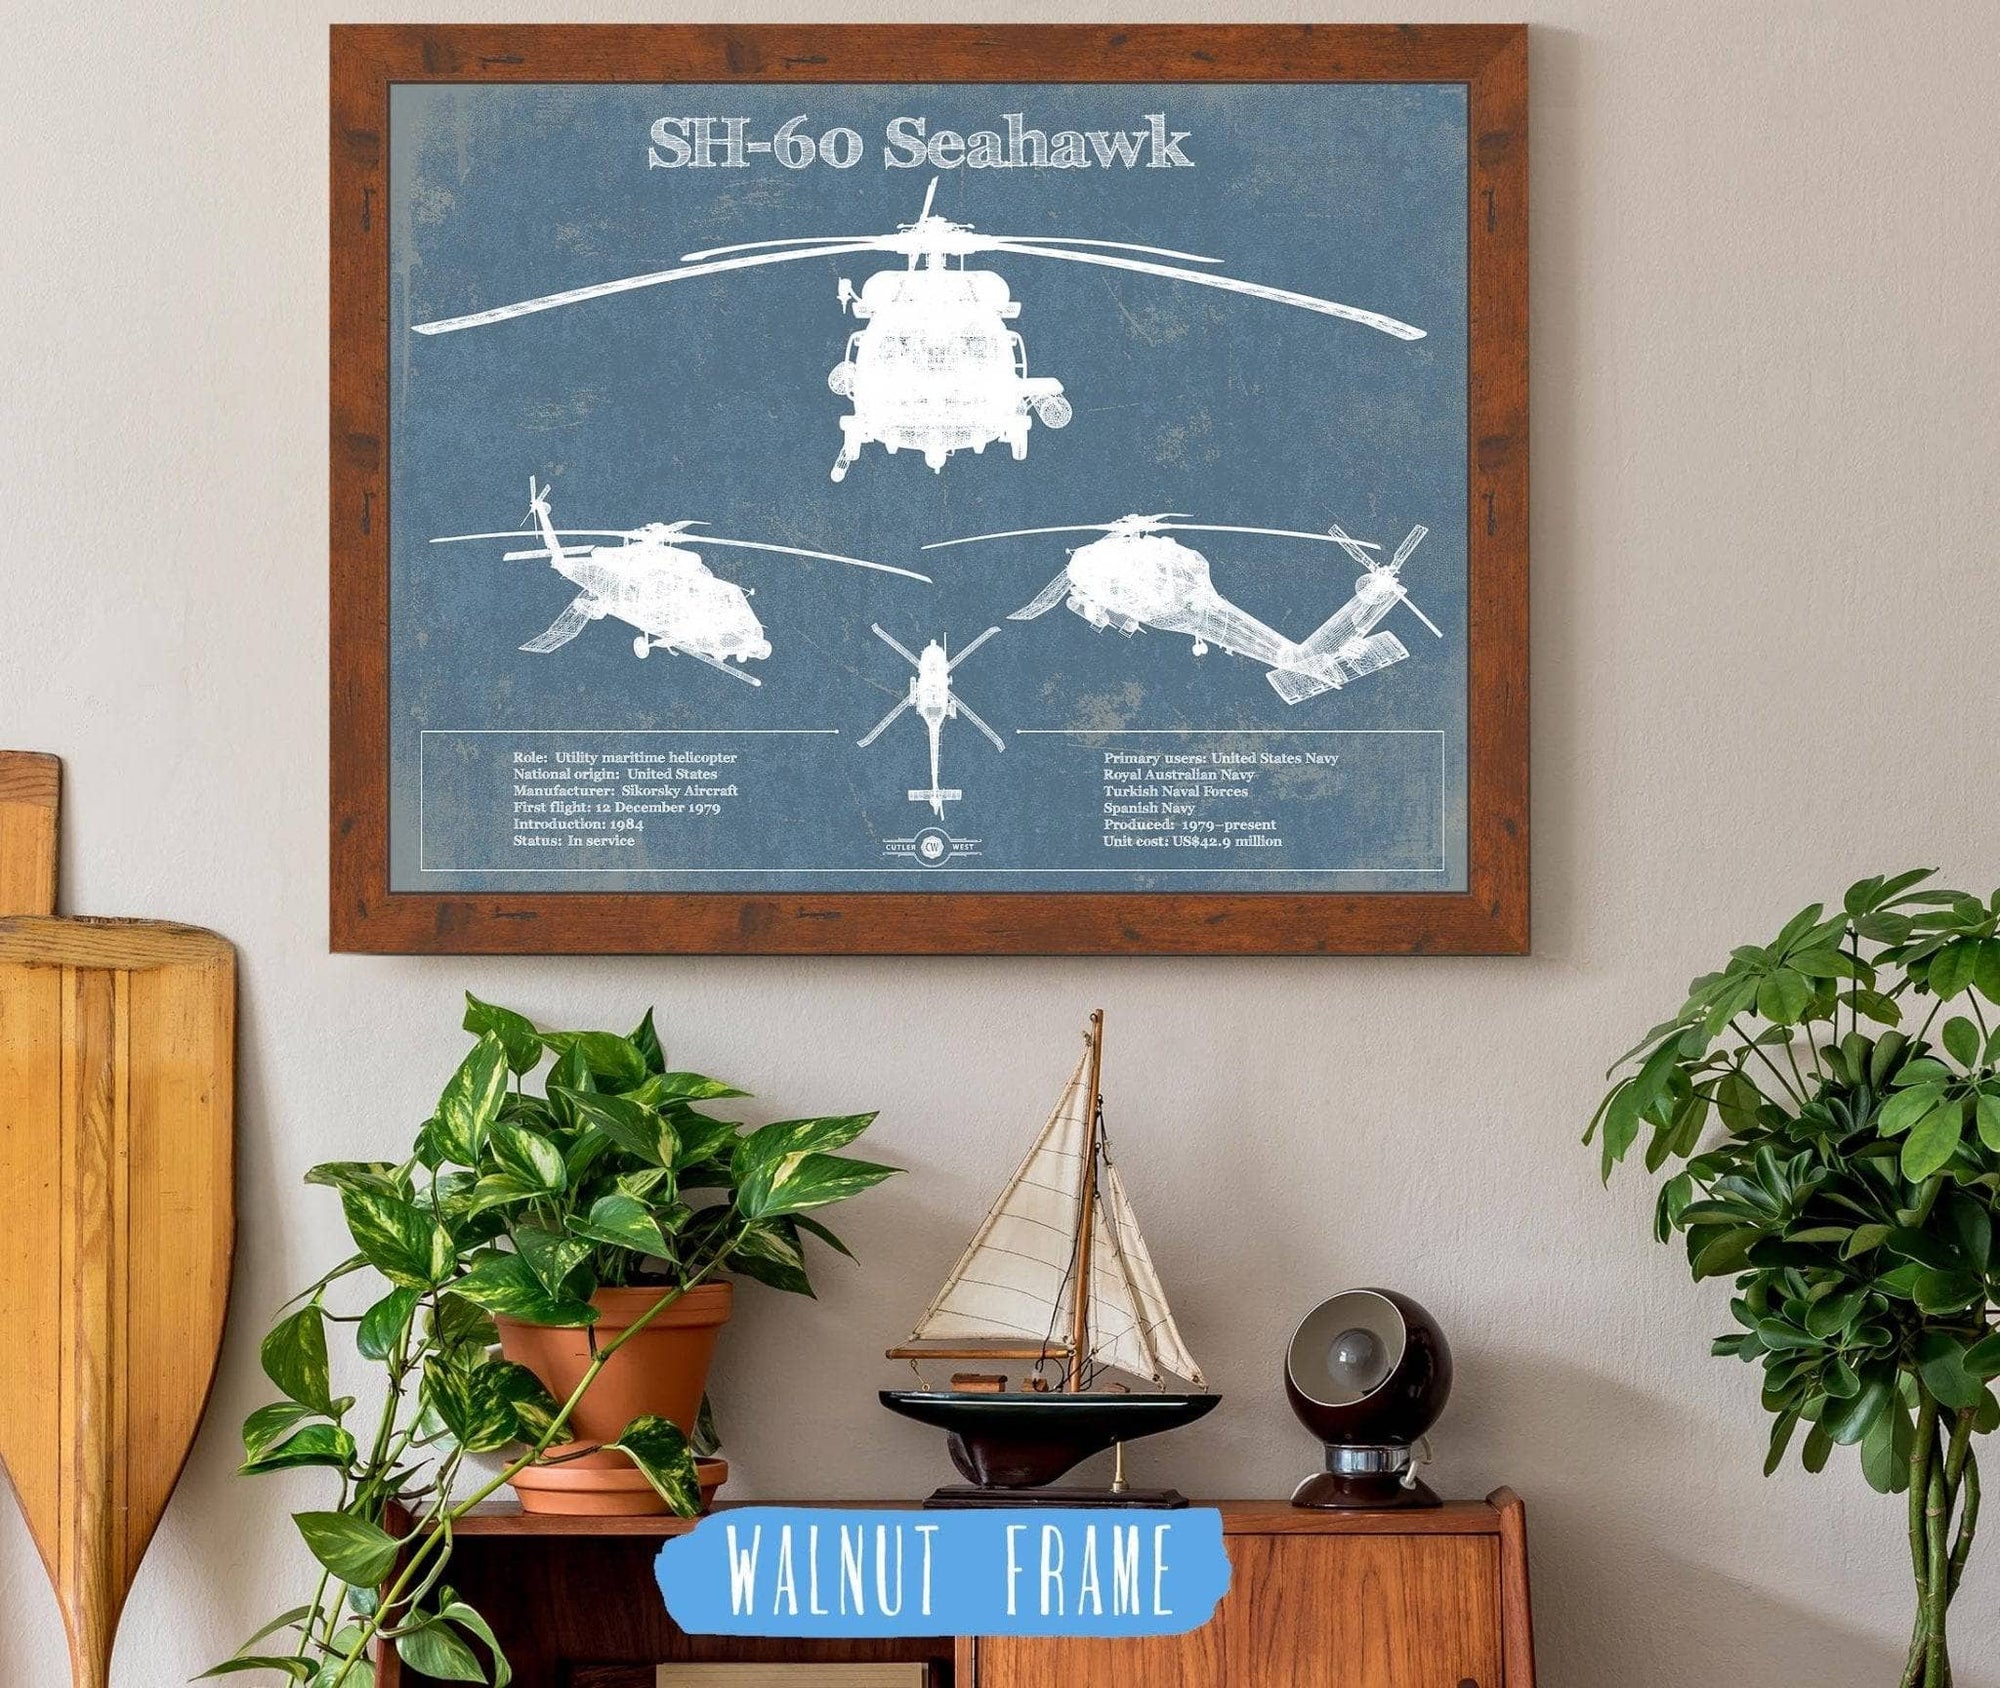 Cutler West Military Aircraft 14" x 11" / Walnut Frame SH-60/MH-60 Seahawk Helicopter Vintage Aviation Blueprint Military Print 833447904_25063